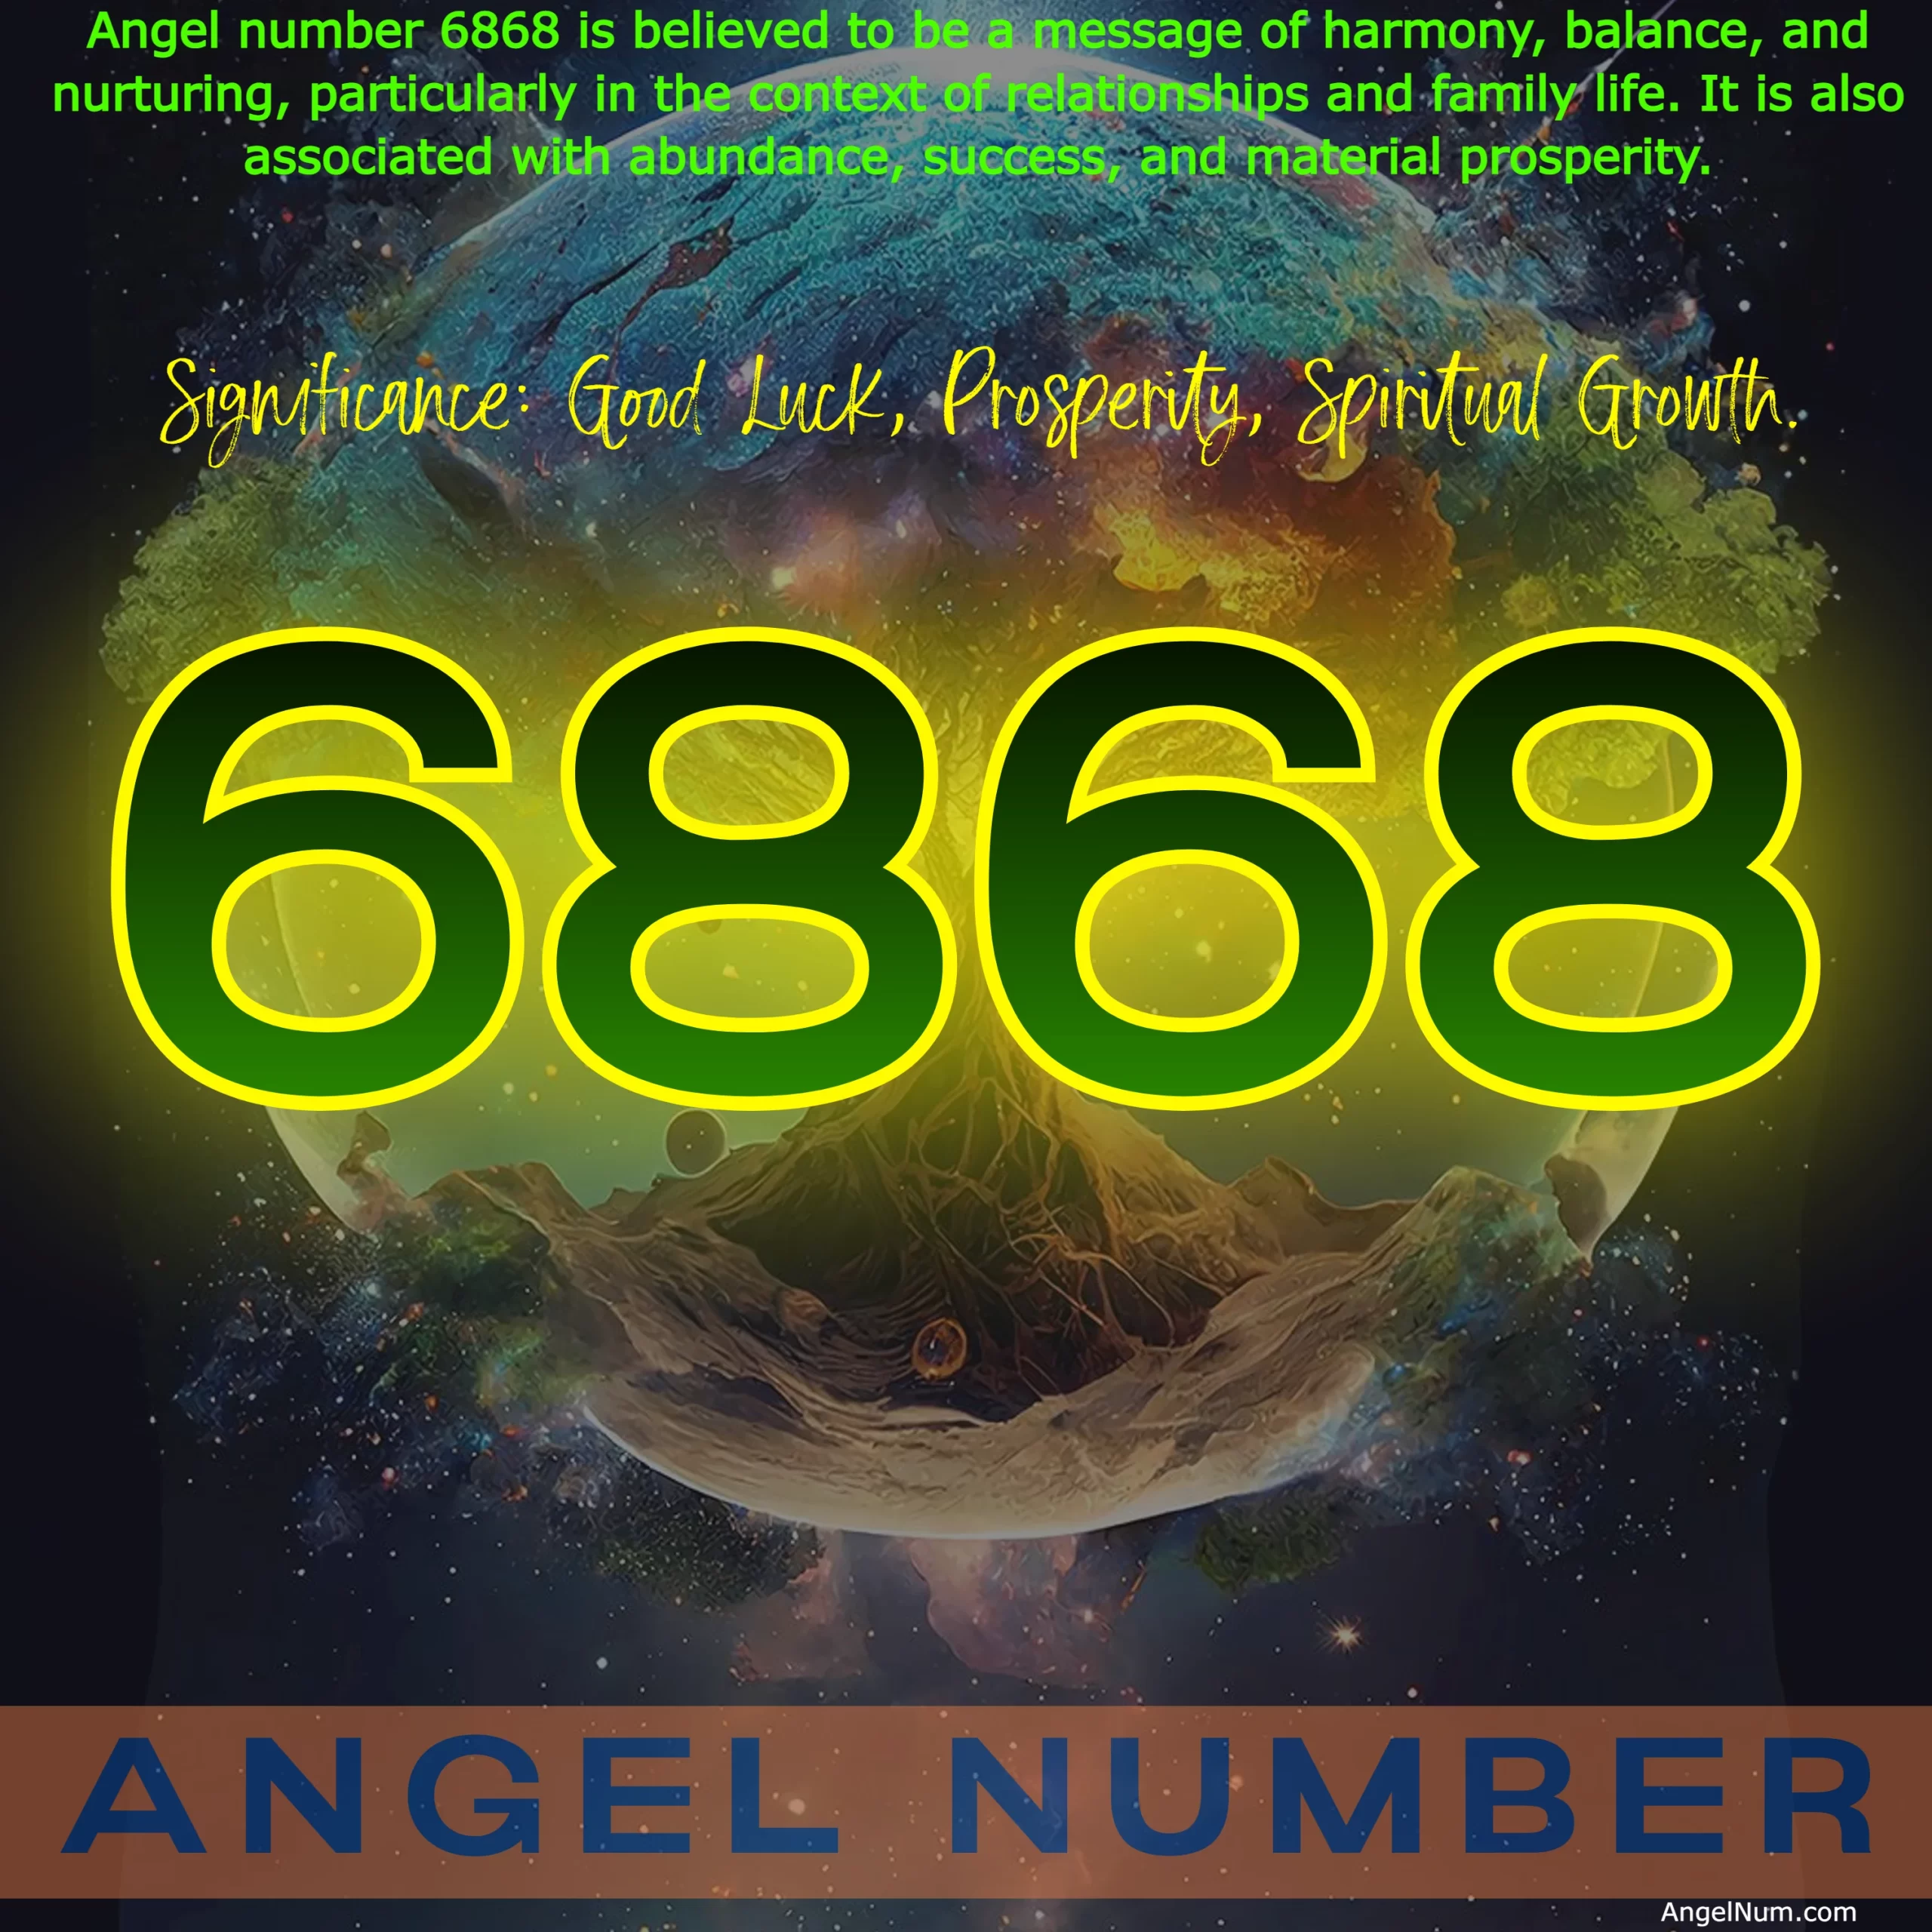 Angel Number 6868: Symbolism, Meaning, and Significance